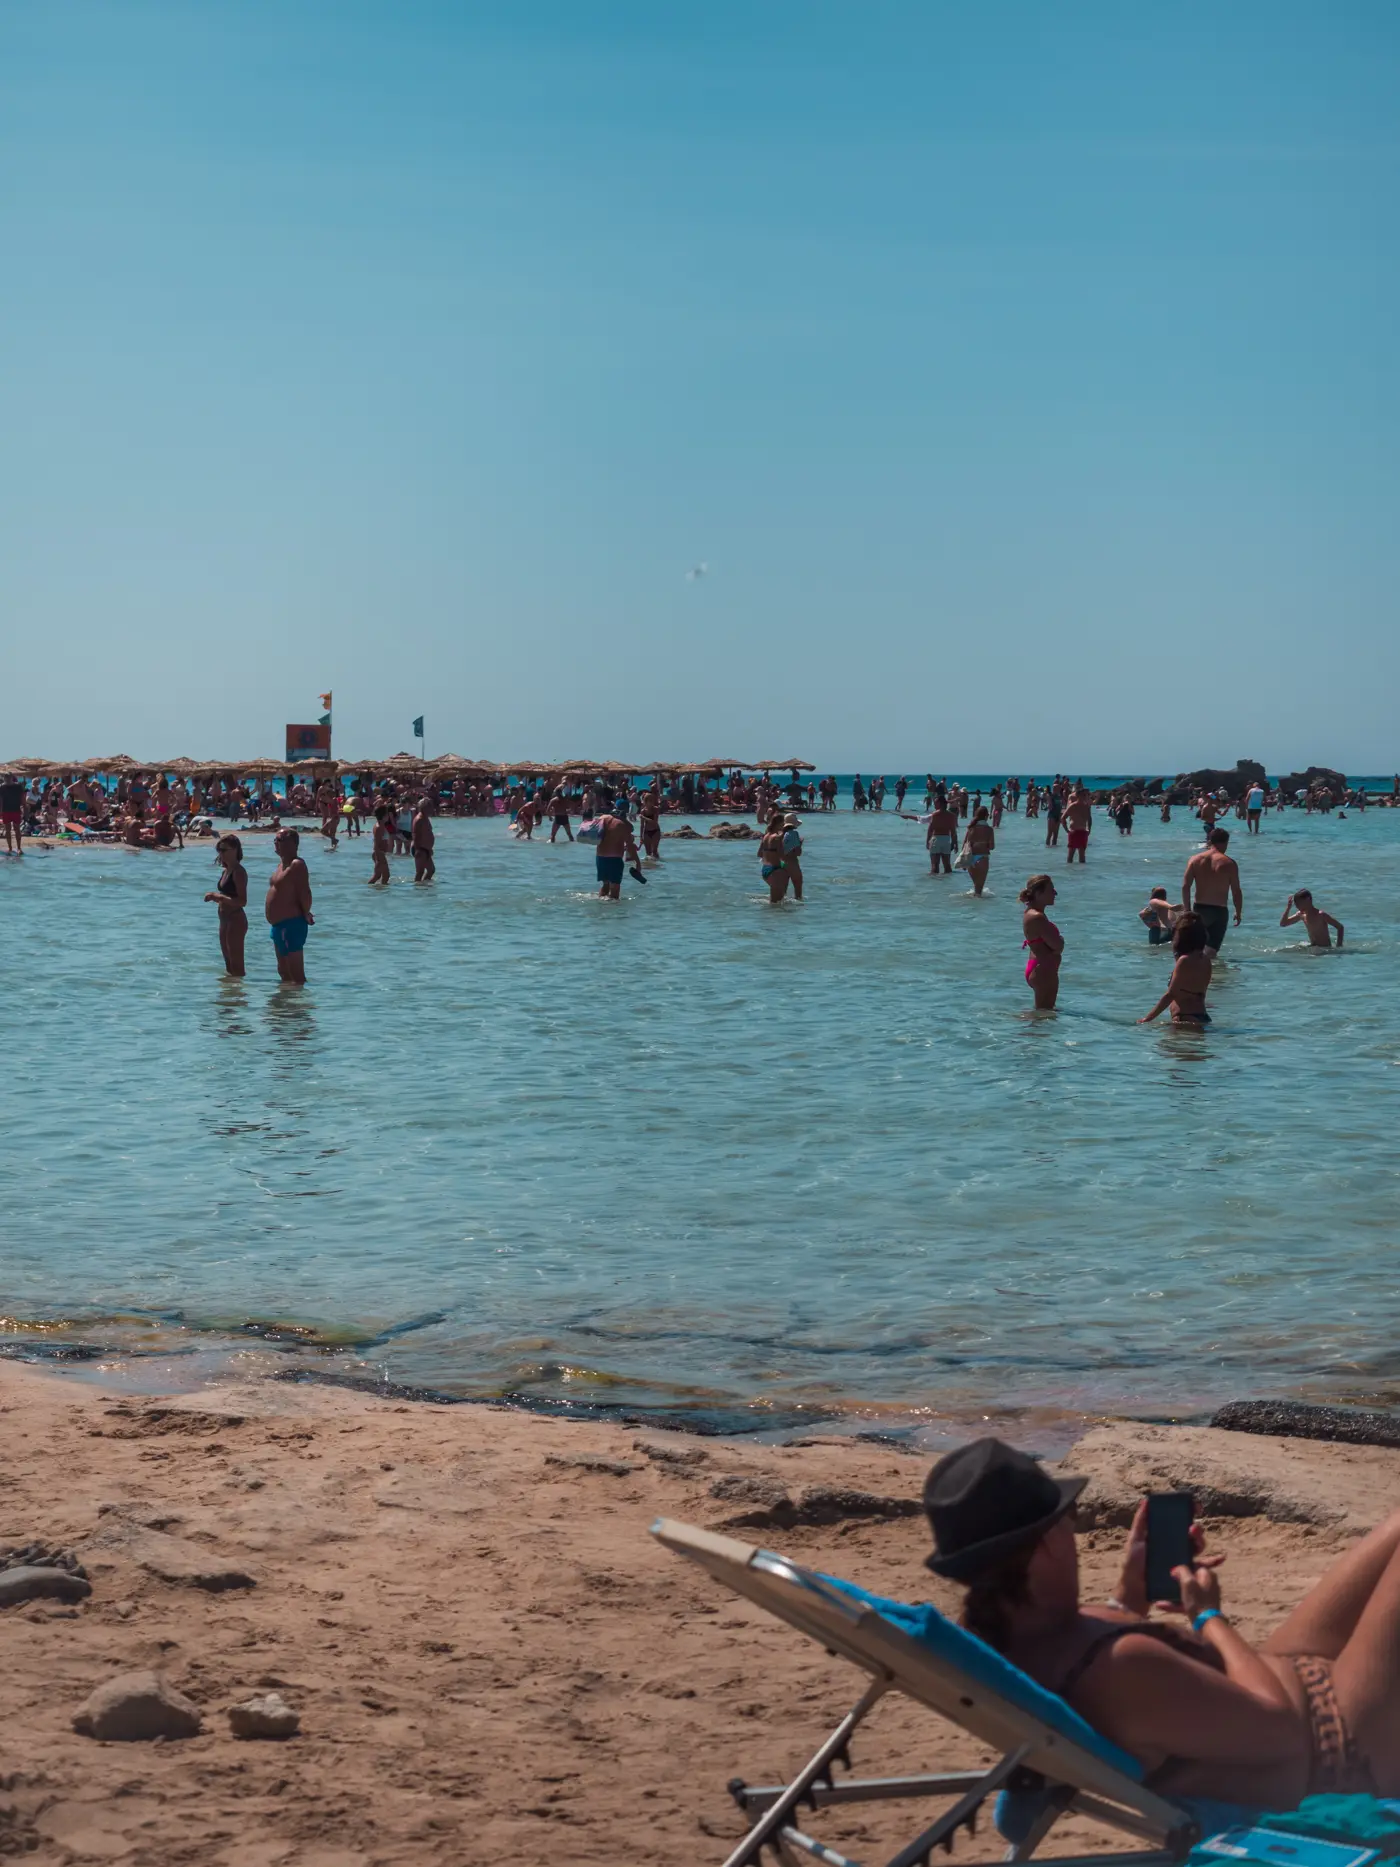 Crowds of people standing out in the shallow water at Elafonisi Beach on a sunny day in late August.